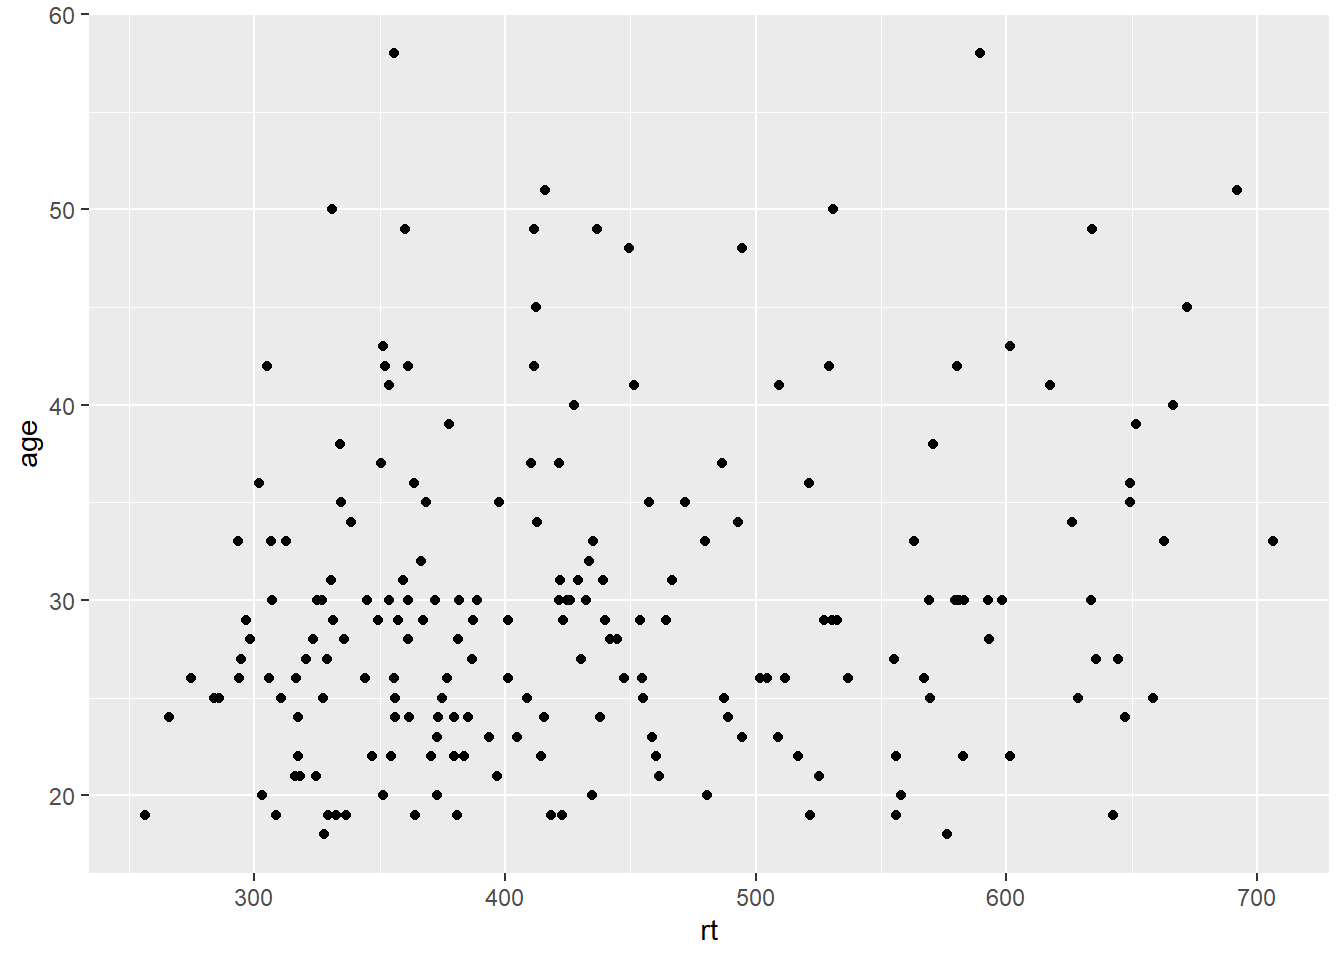 Scatterplot of reaction time versus age.